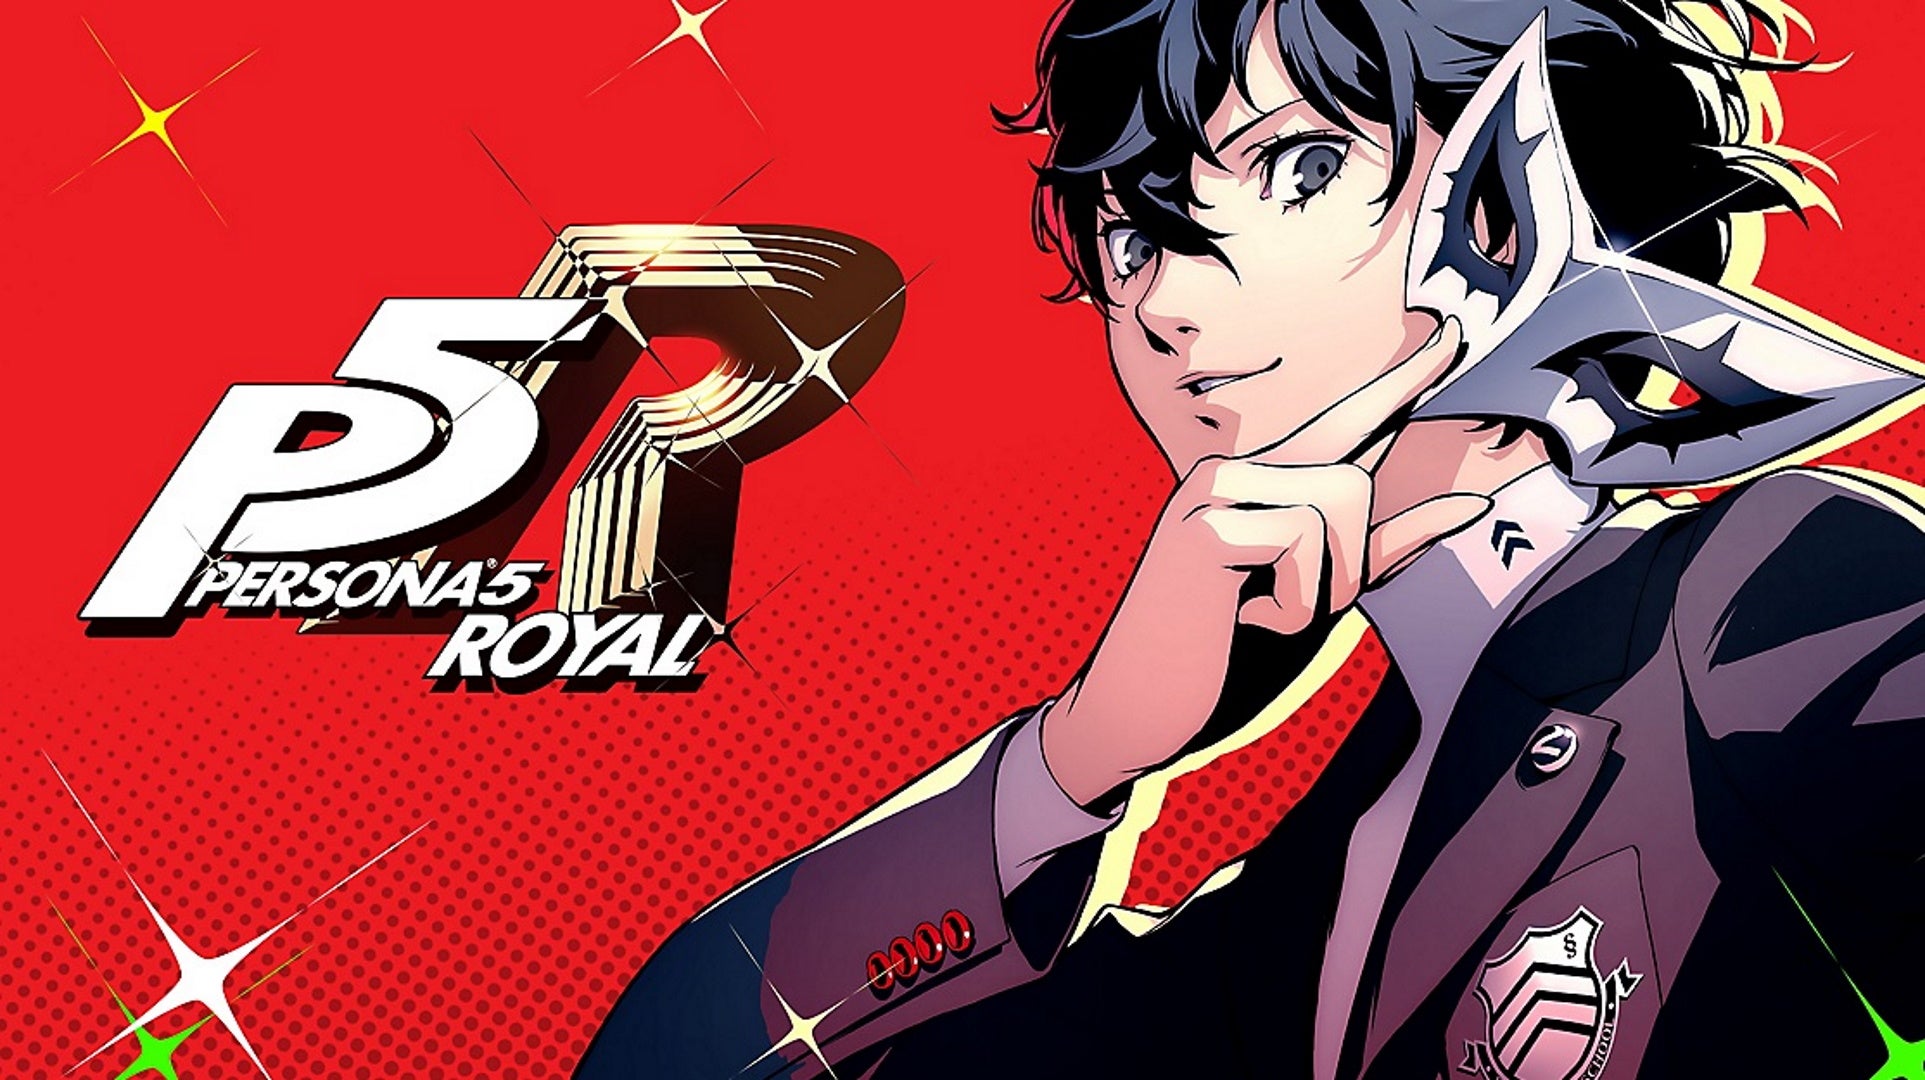 Persona 5 Royal classroom answers and exam answers | VG247